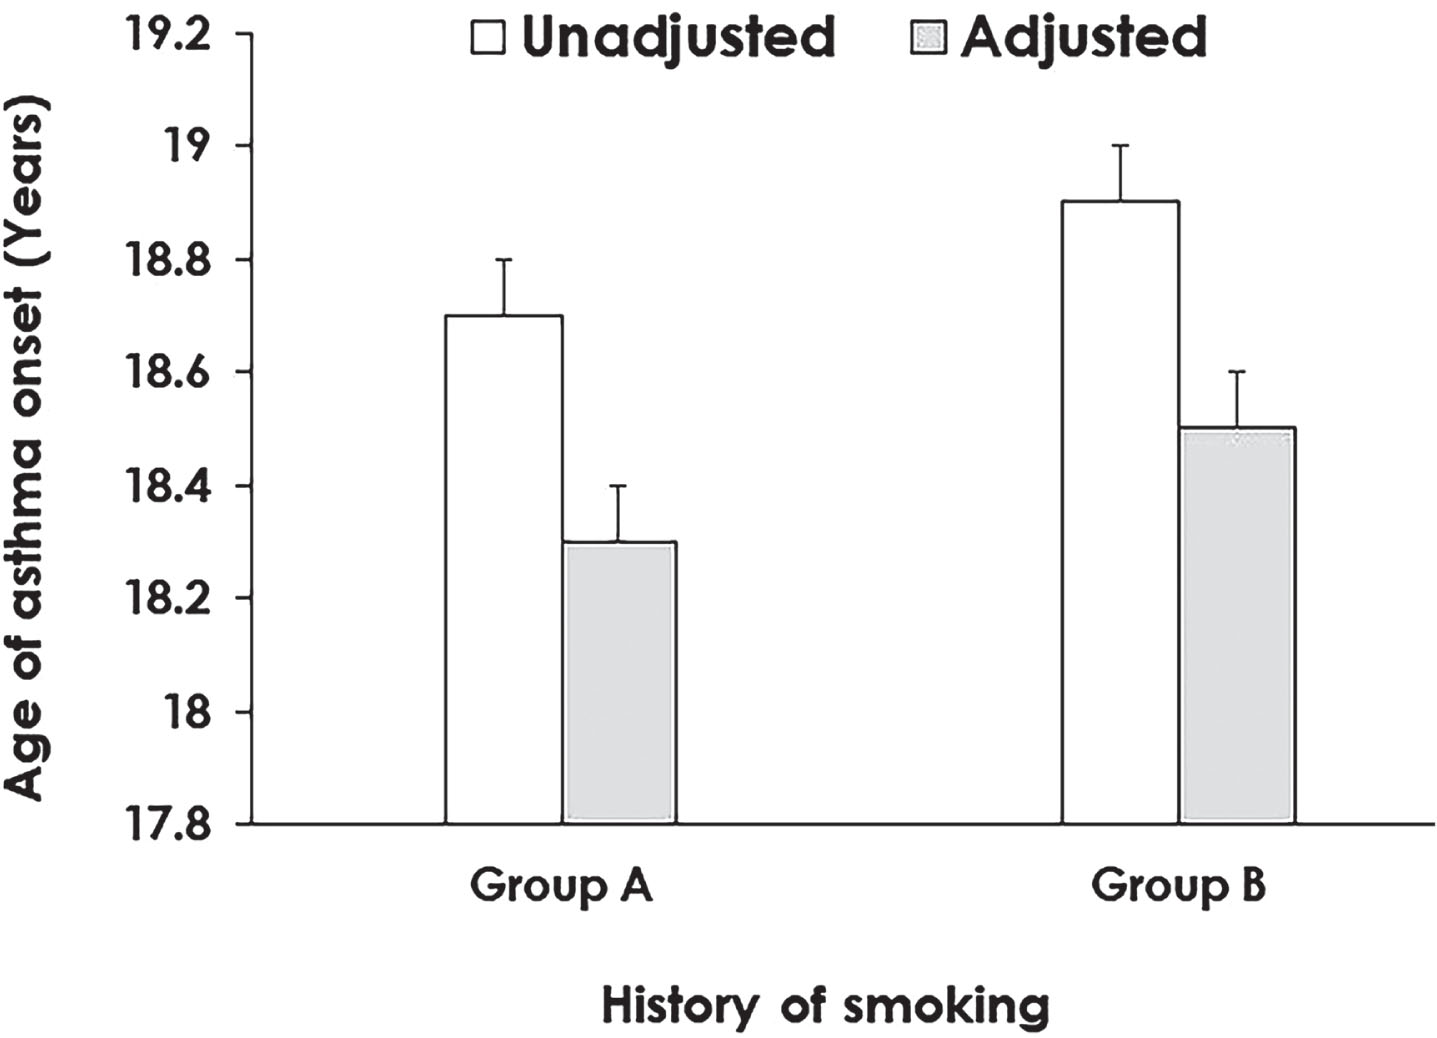 The mean age of asthma onset among adults who smoked according to grew up living with A) a father or mother who smoked; B) other people who smoked in the workplace. The multiple linear regression model is adjusted for age, sex, race, educational level, employment status, marital status, alcohol intake status, physical activity status, obesity status, central obesity status, joint disease, diabetes, and cardiovascular diseases. Empty bars represent unadjusted estimates of the mean age of asthma onset; light gray bars show adjusted estimates of the mean age of asthma onset.